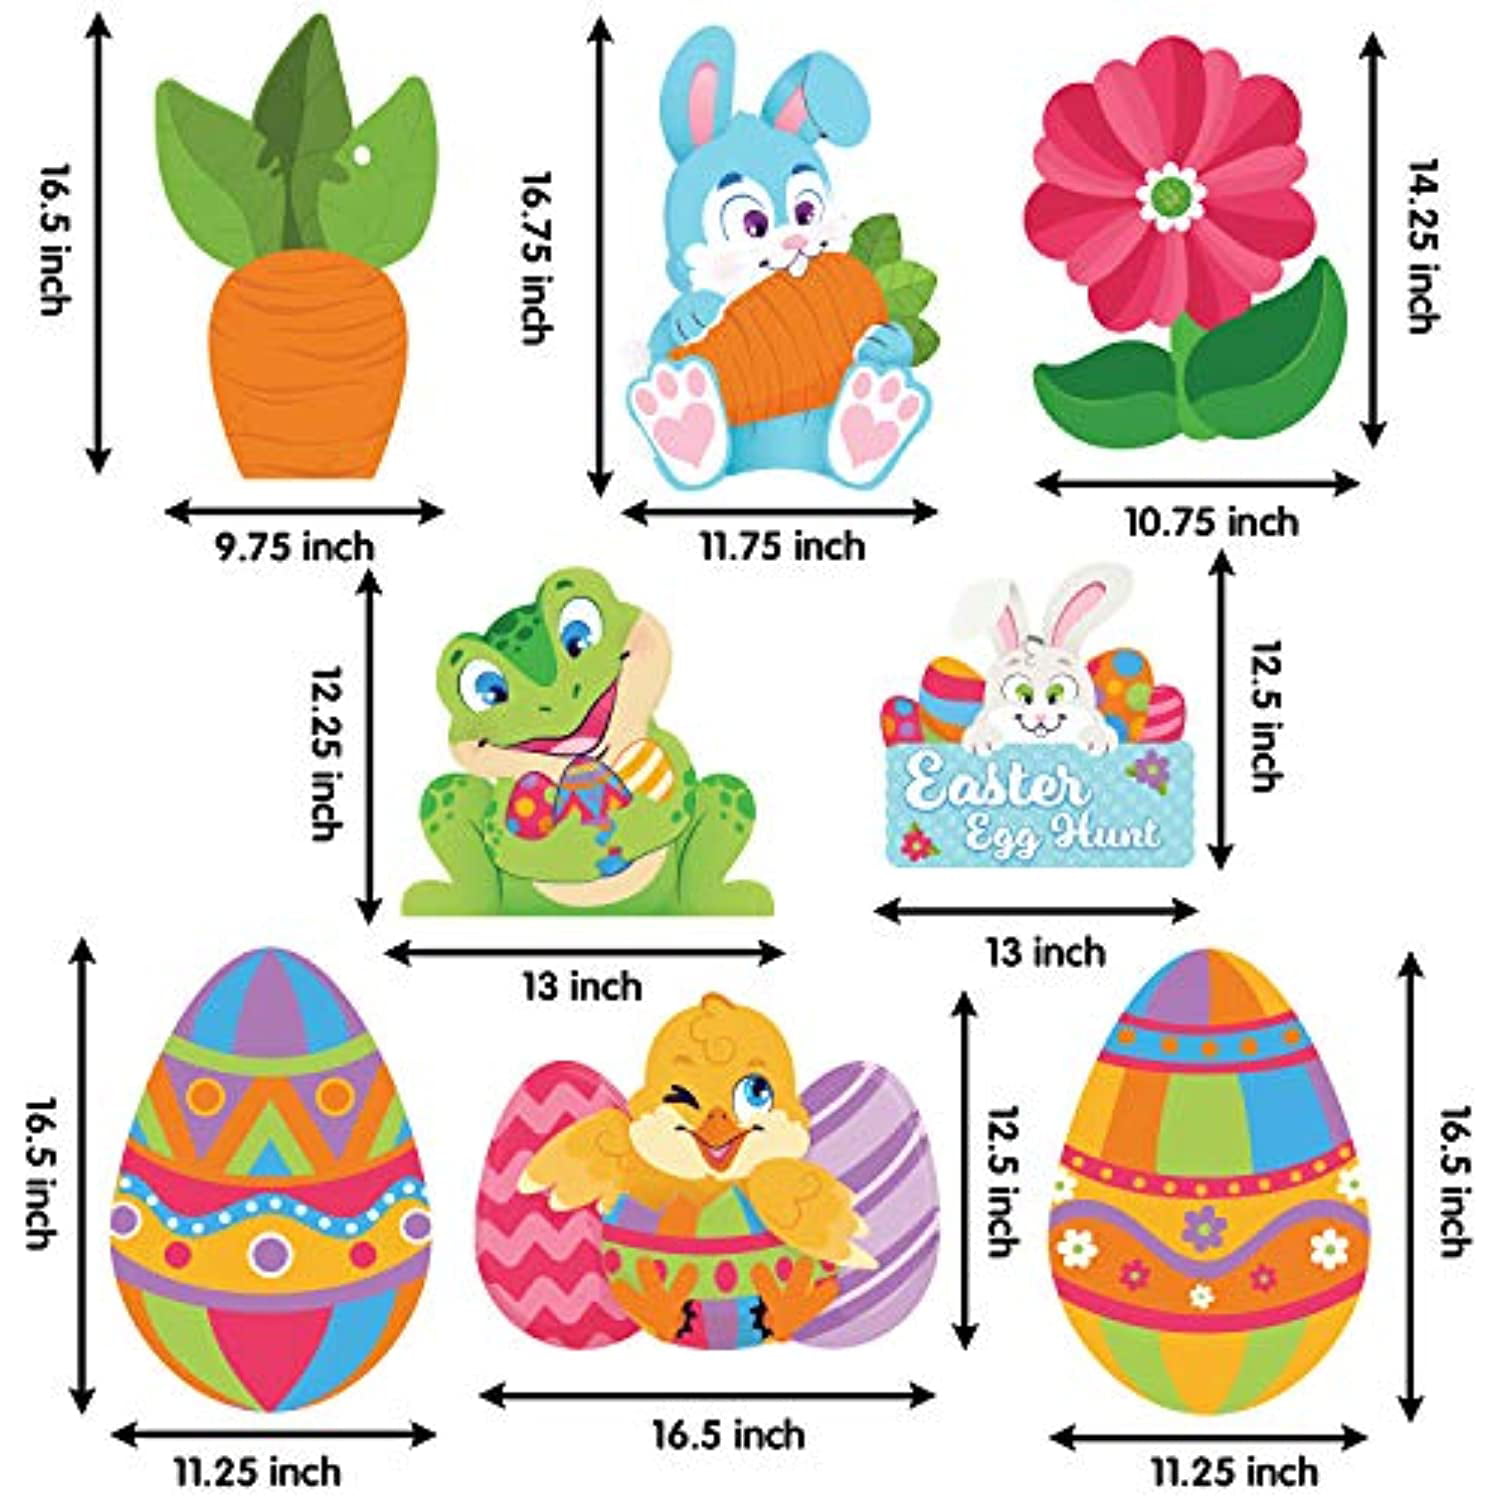 8 Pieces Easter Yard Signs Decorations Outdoor Bunny Chick and Eggs Yard Stake Signs Easter Lawn Yard Decorations for Easter Hunt Game,